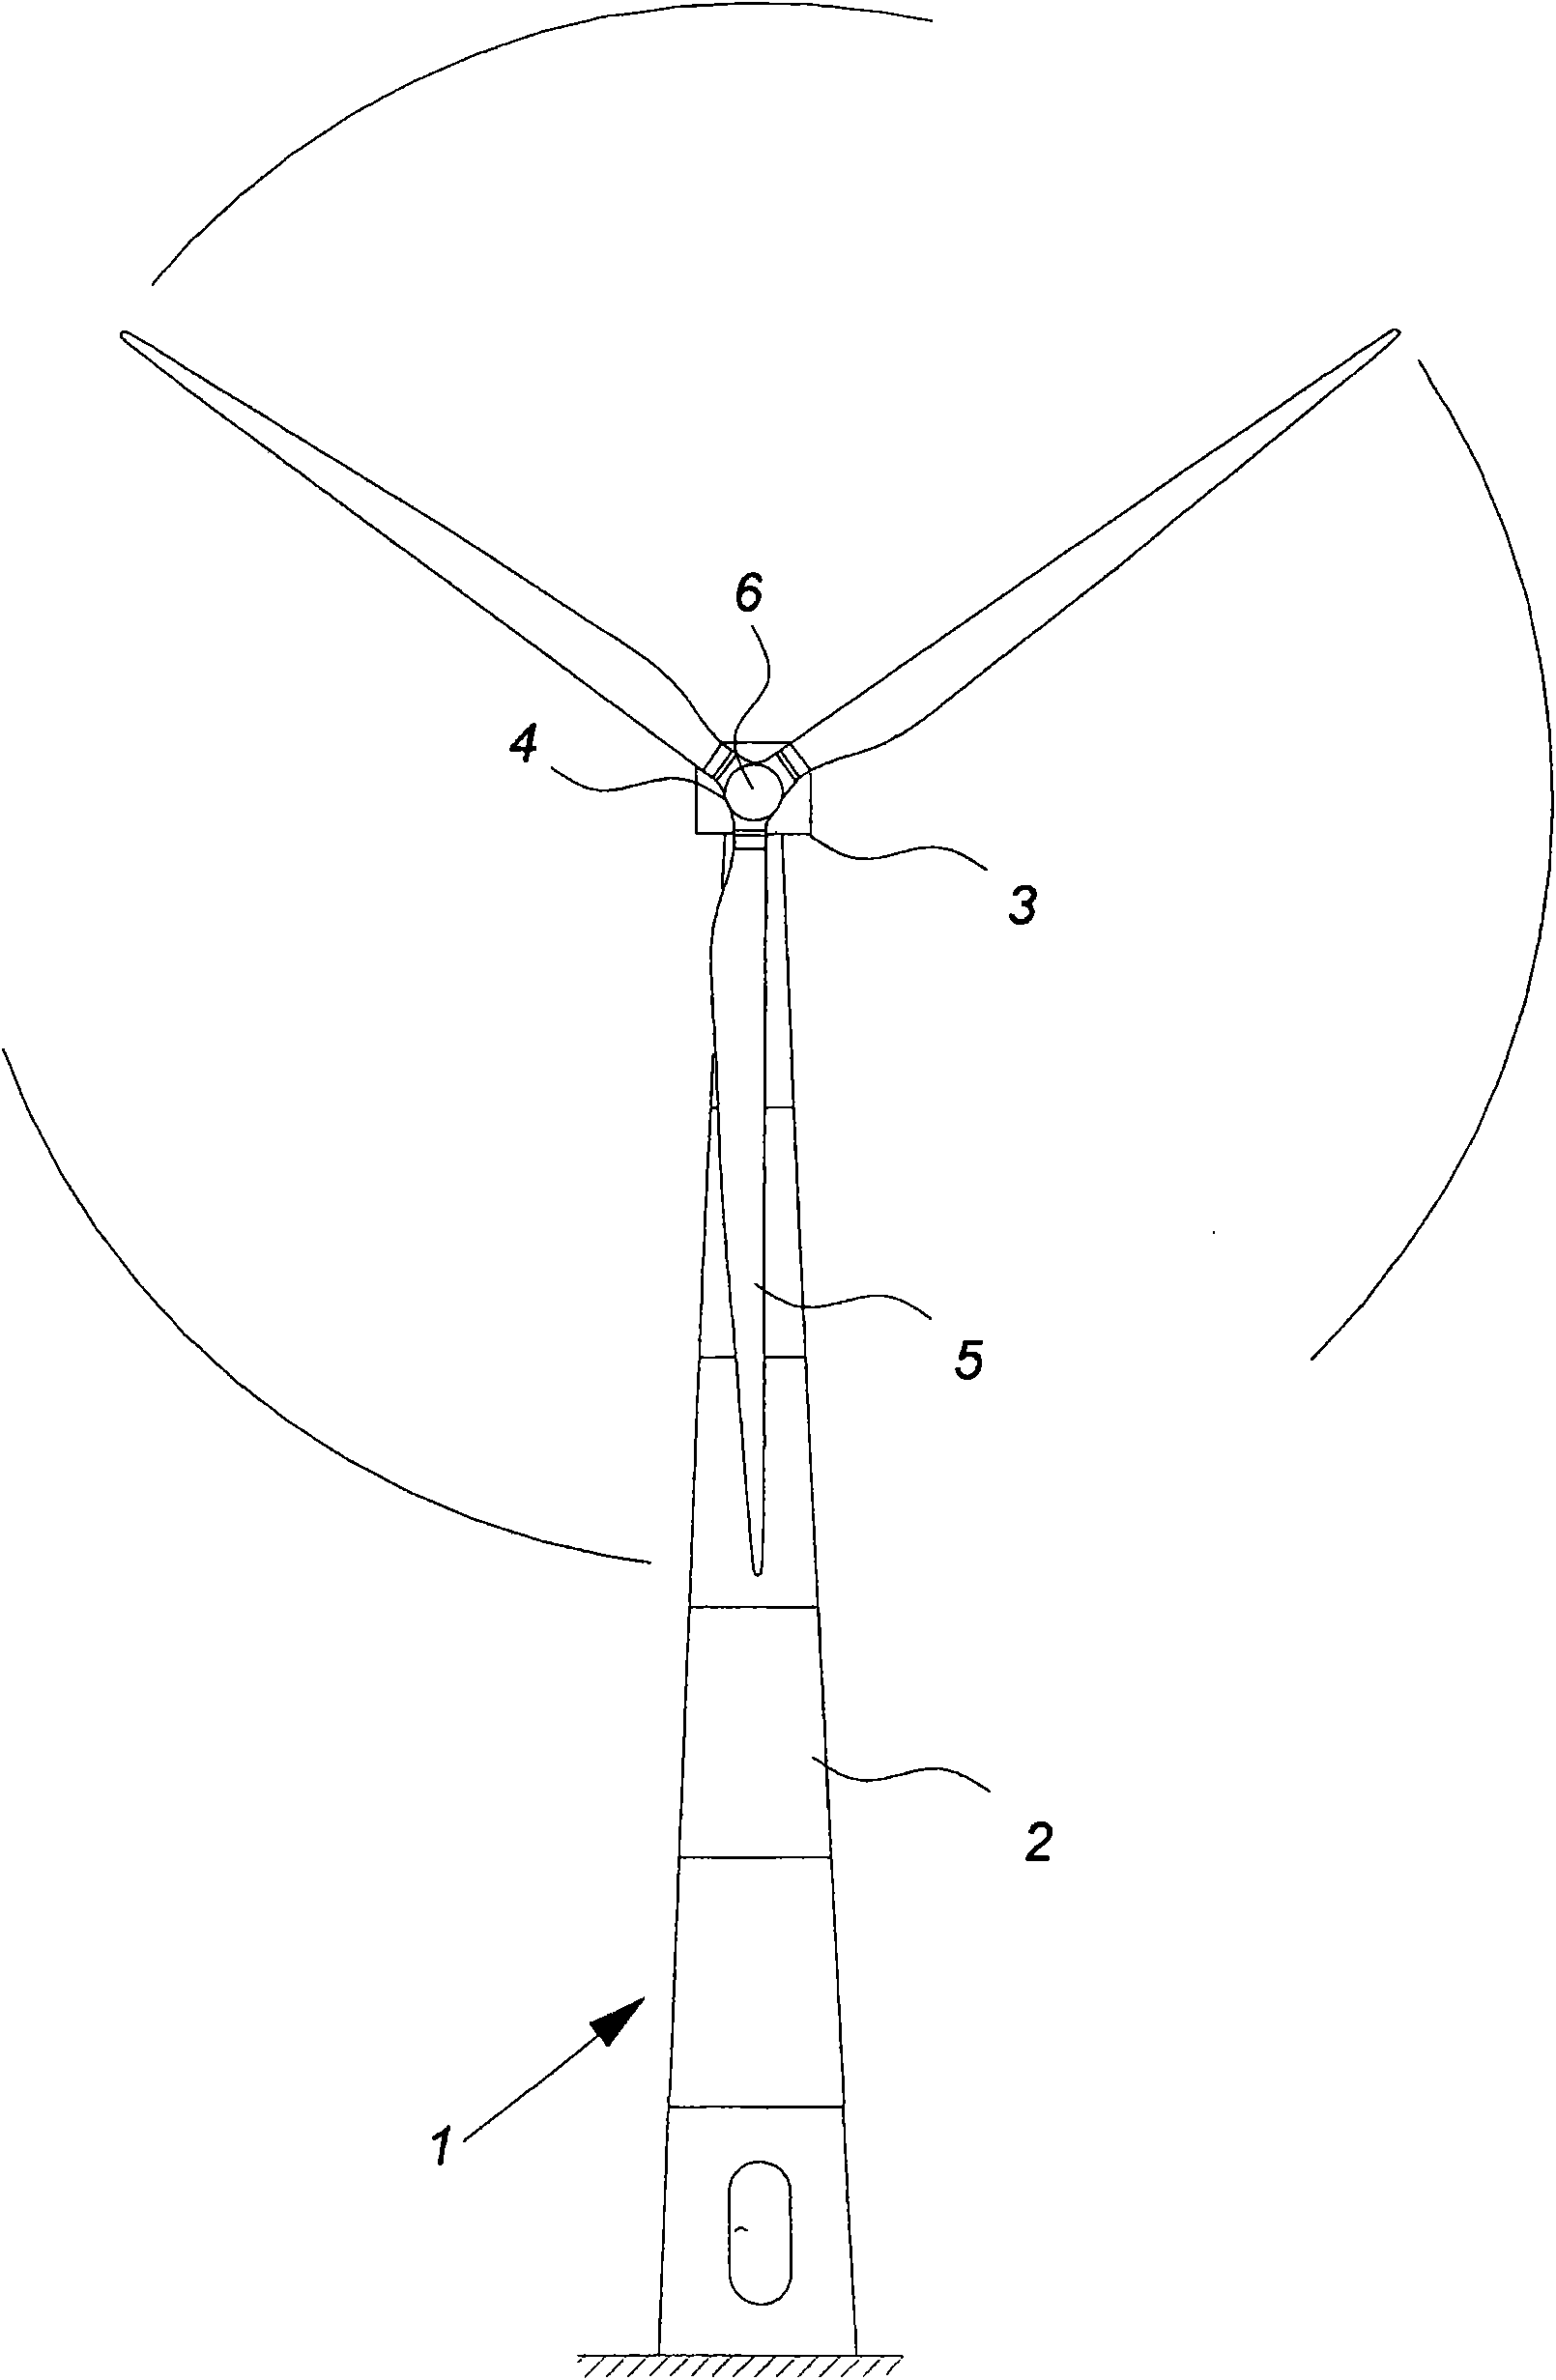 A method for operating a wind turbine, a wind turbine and use of the method